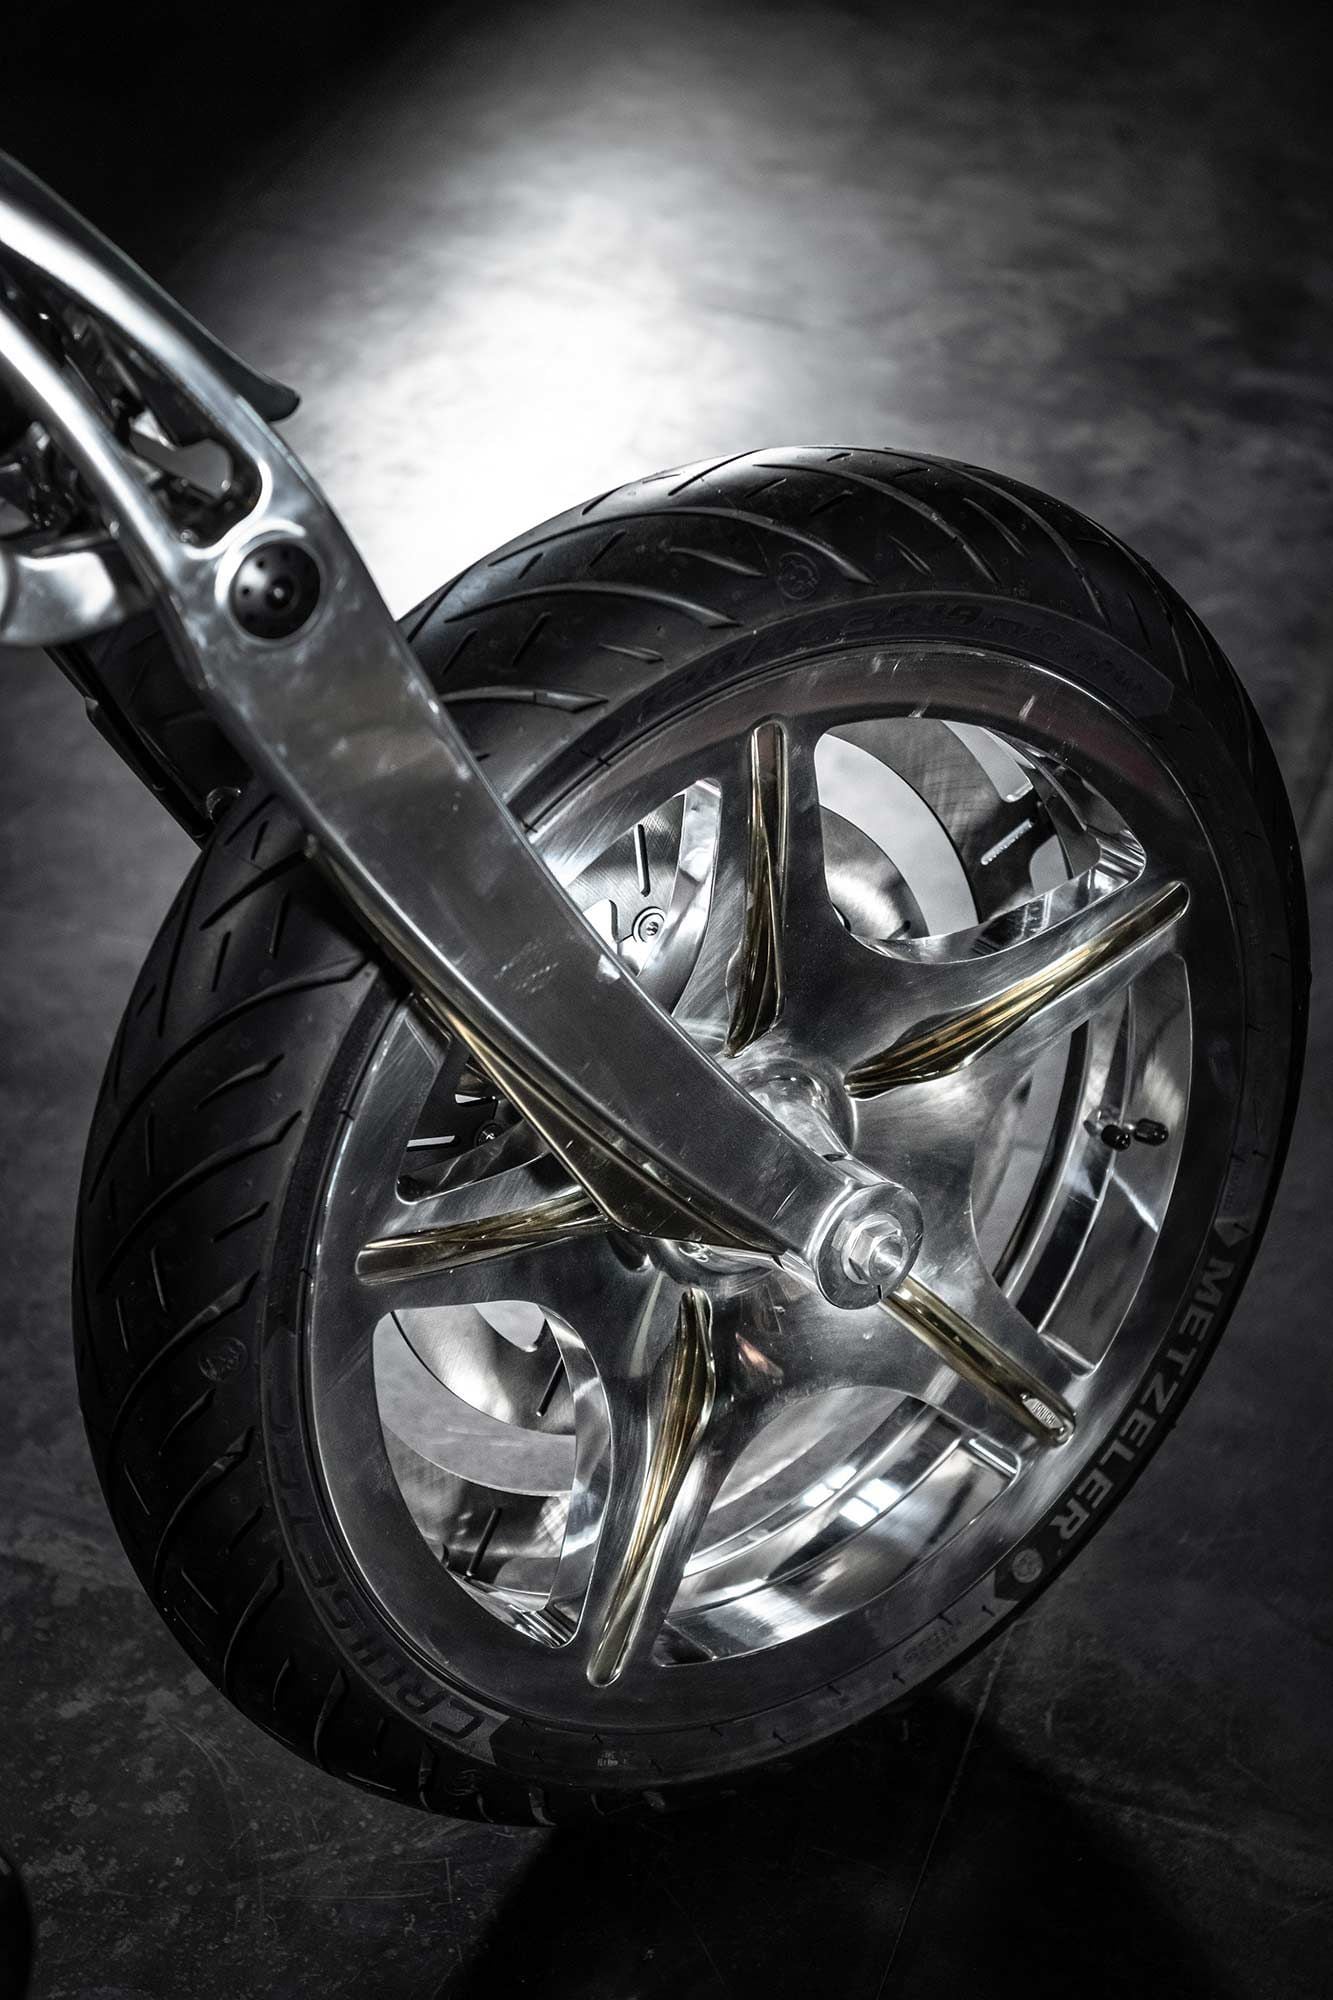 Magnifica retains the same tire sizes as the stock R 18, though the billet wheels are custom machined.